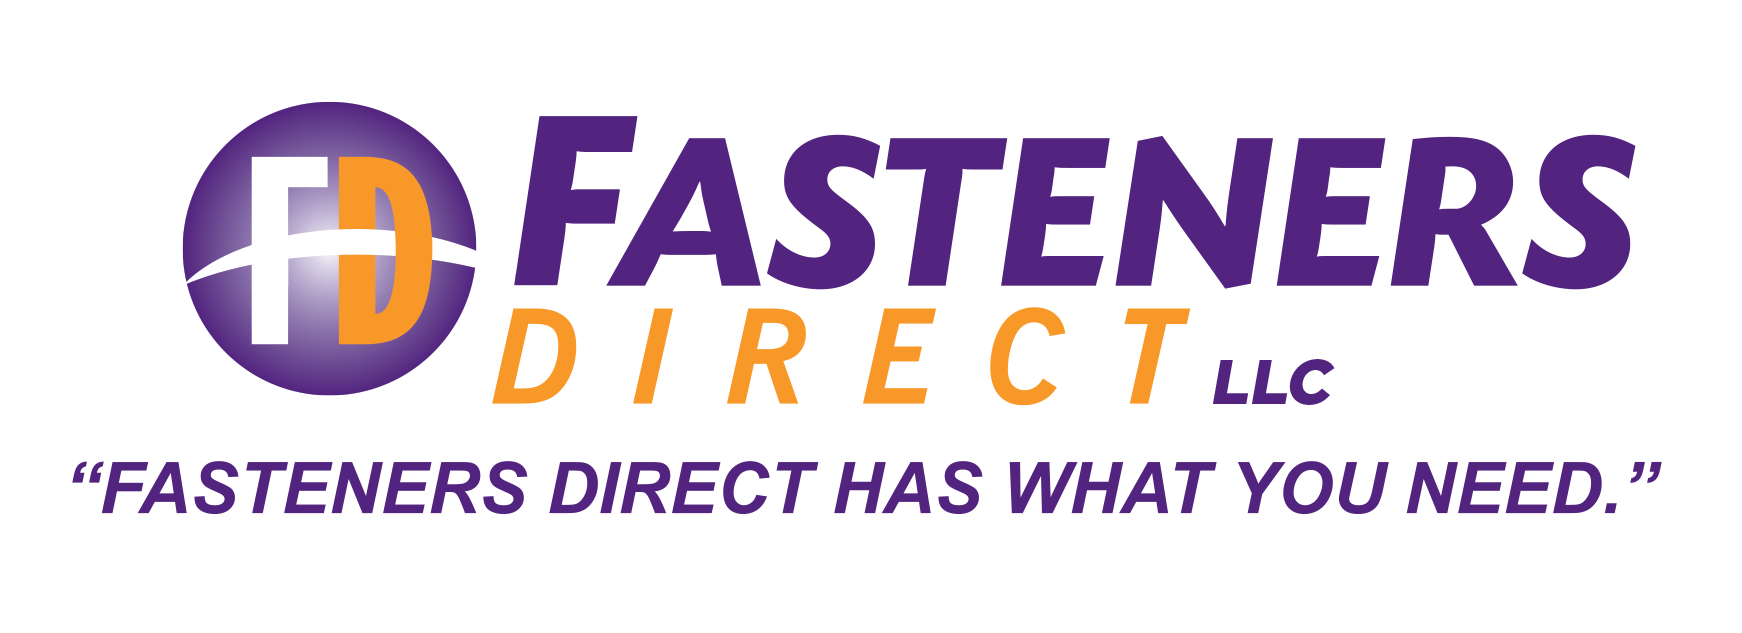 Fasteners Direct